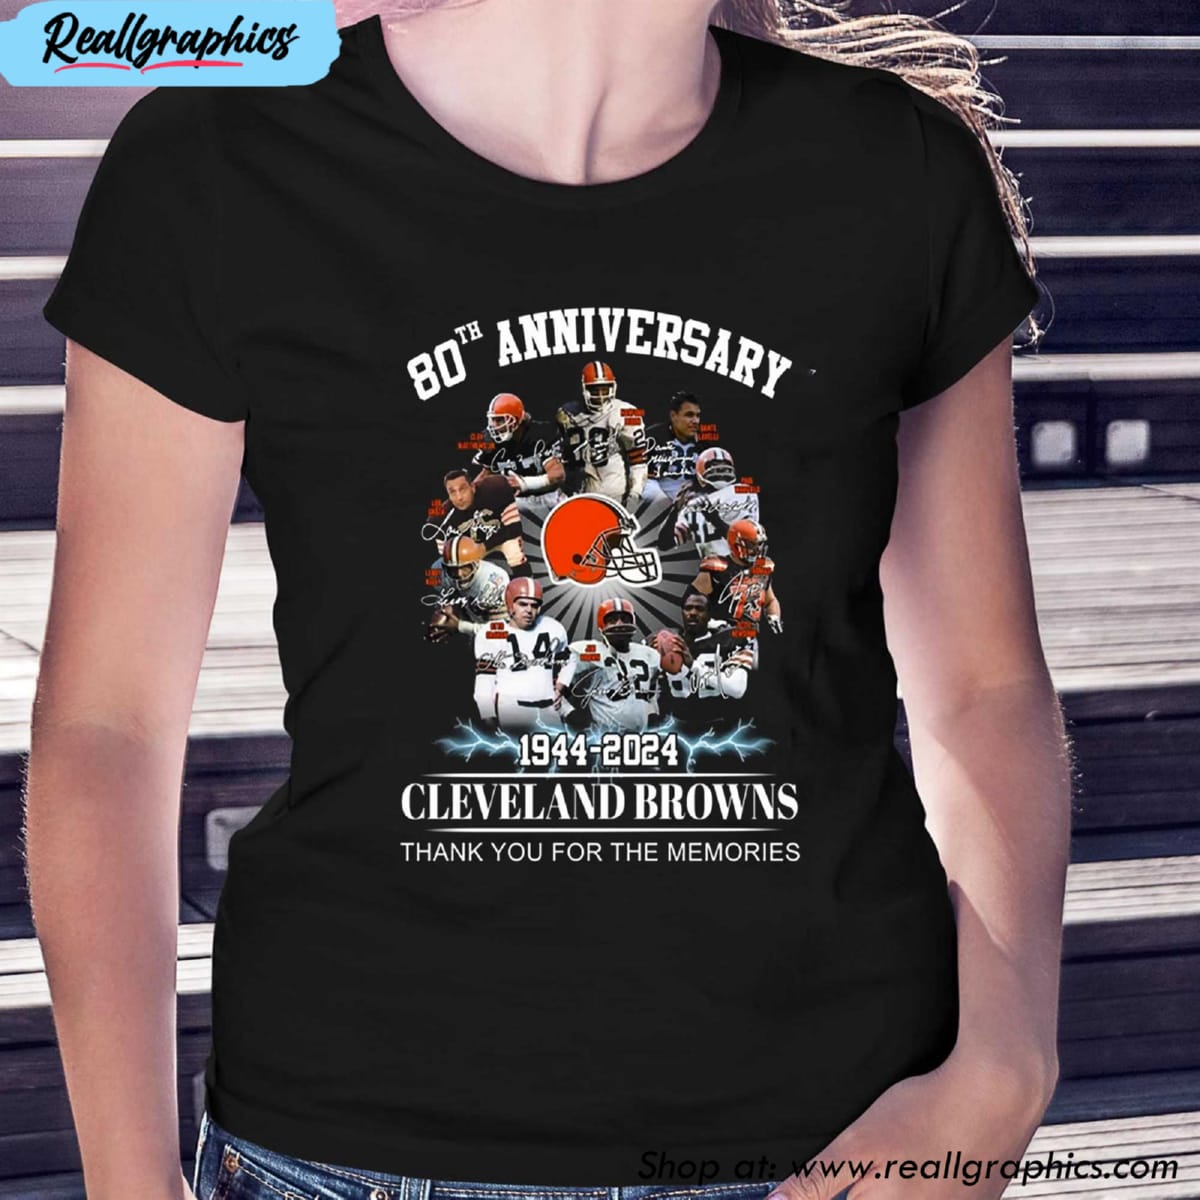 80th Anniversary 1944 - 2024 Cleveland Browns Thank You For The Memories  Unisex T-shirt, Hoodie, Sweatshirt - Reallgraphics